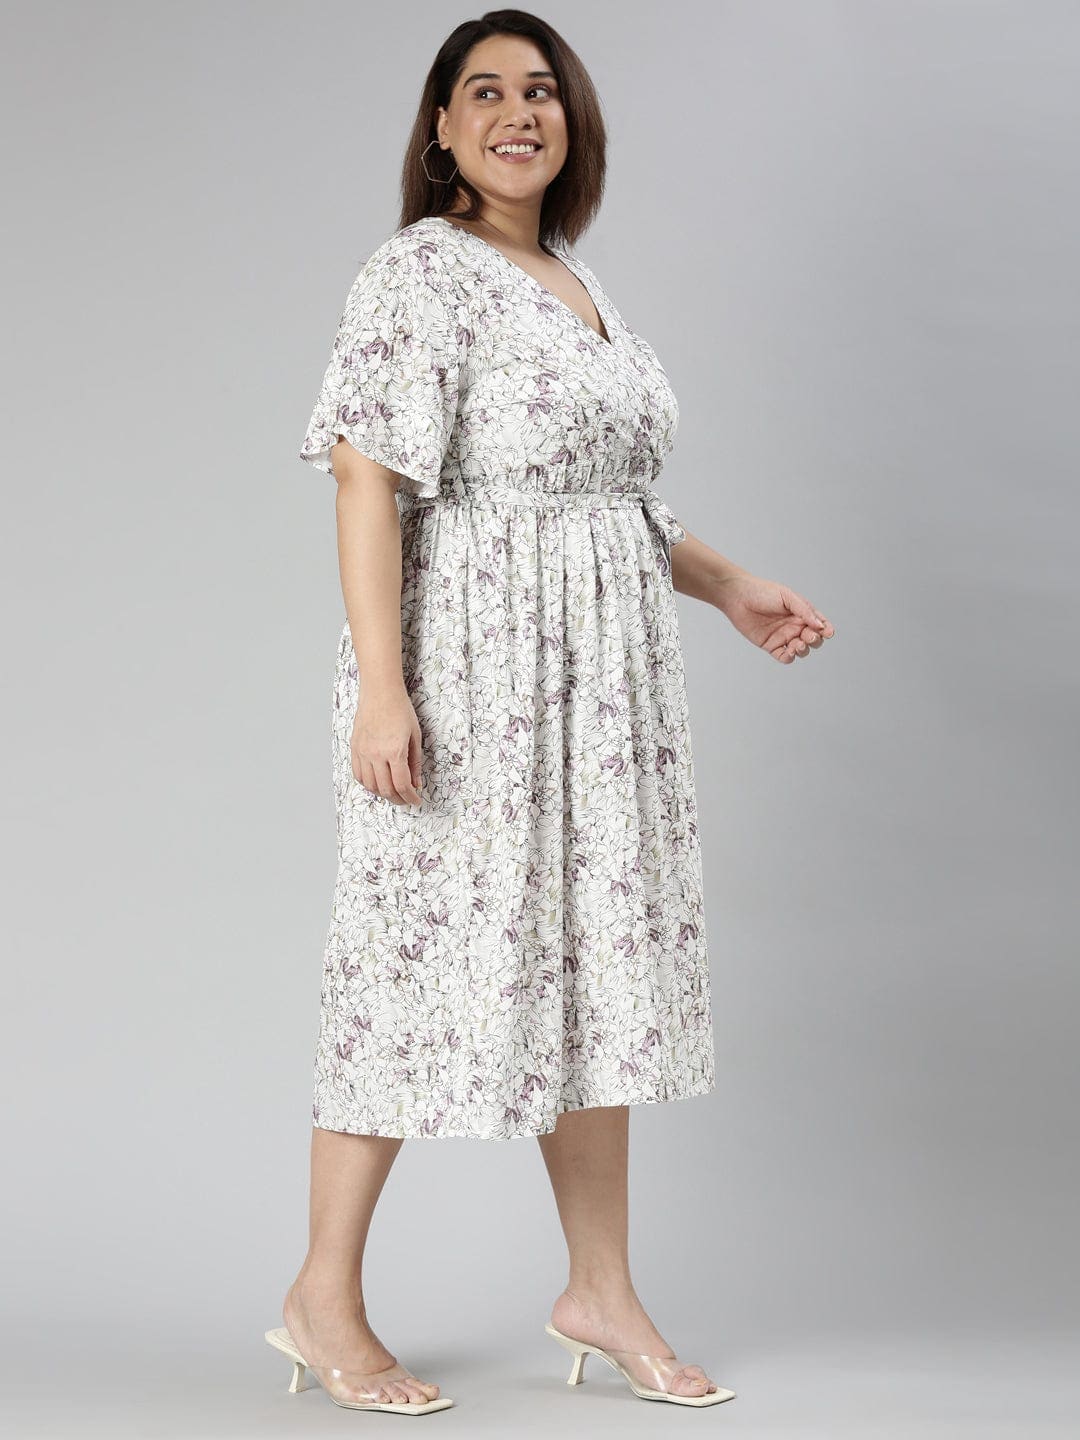 TheShaili - Women's White Floral printed Maxi overlap dress with Bell sleeves